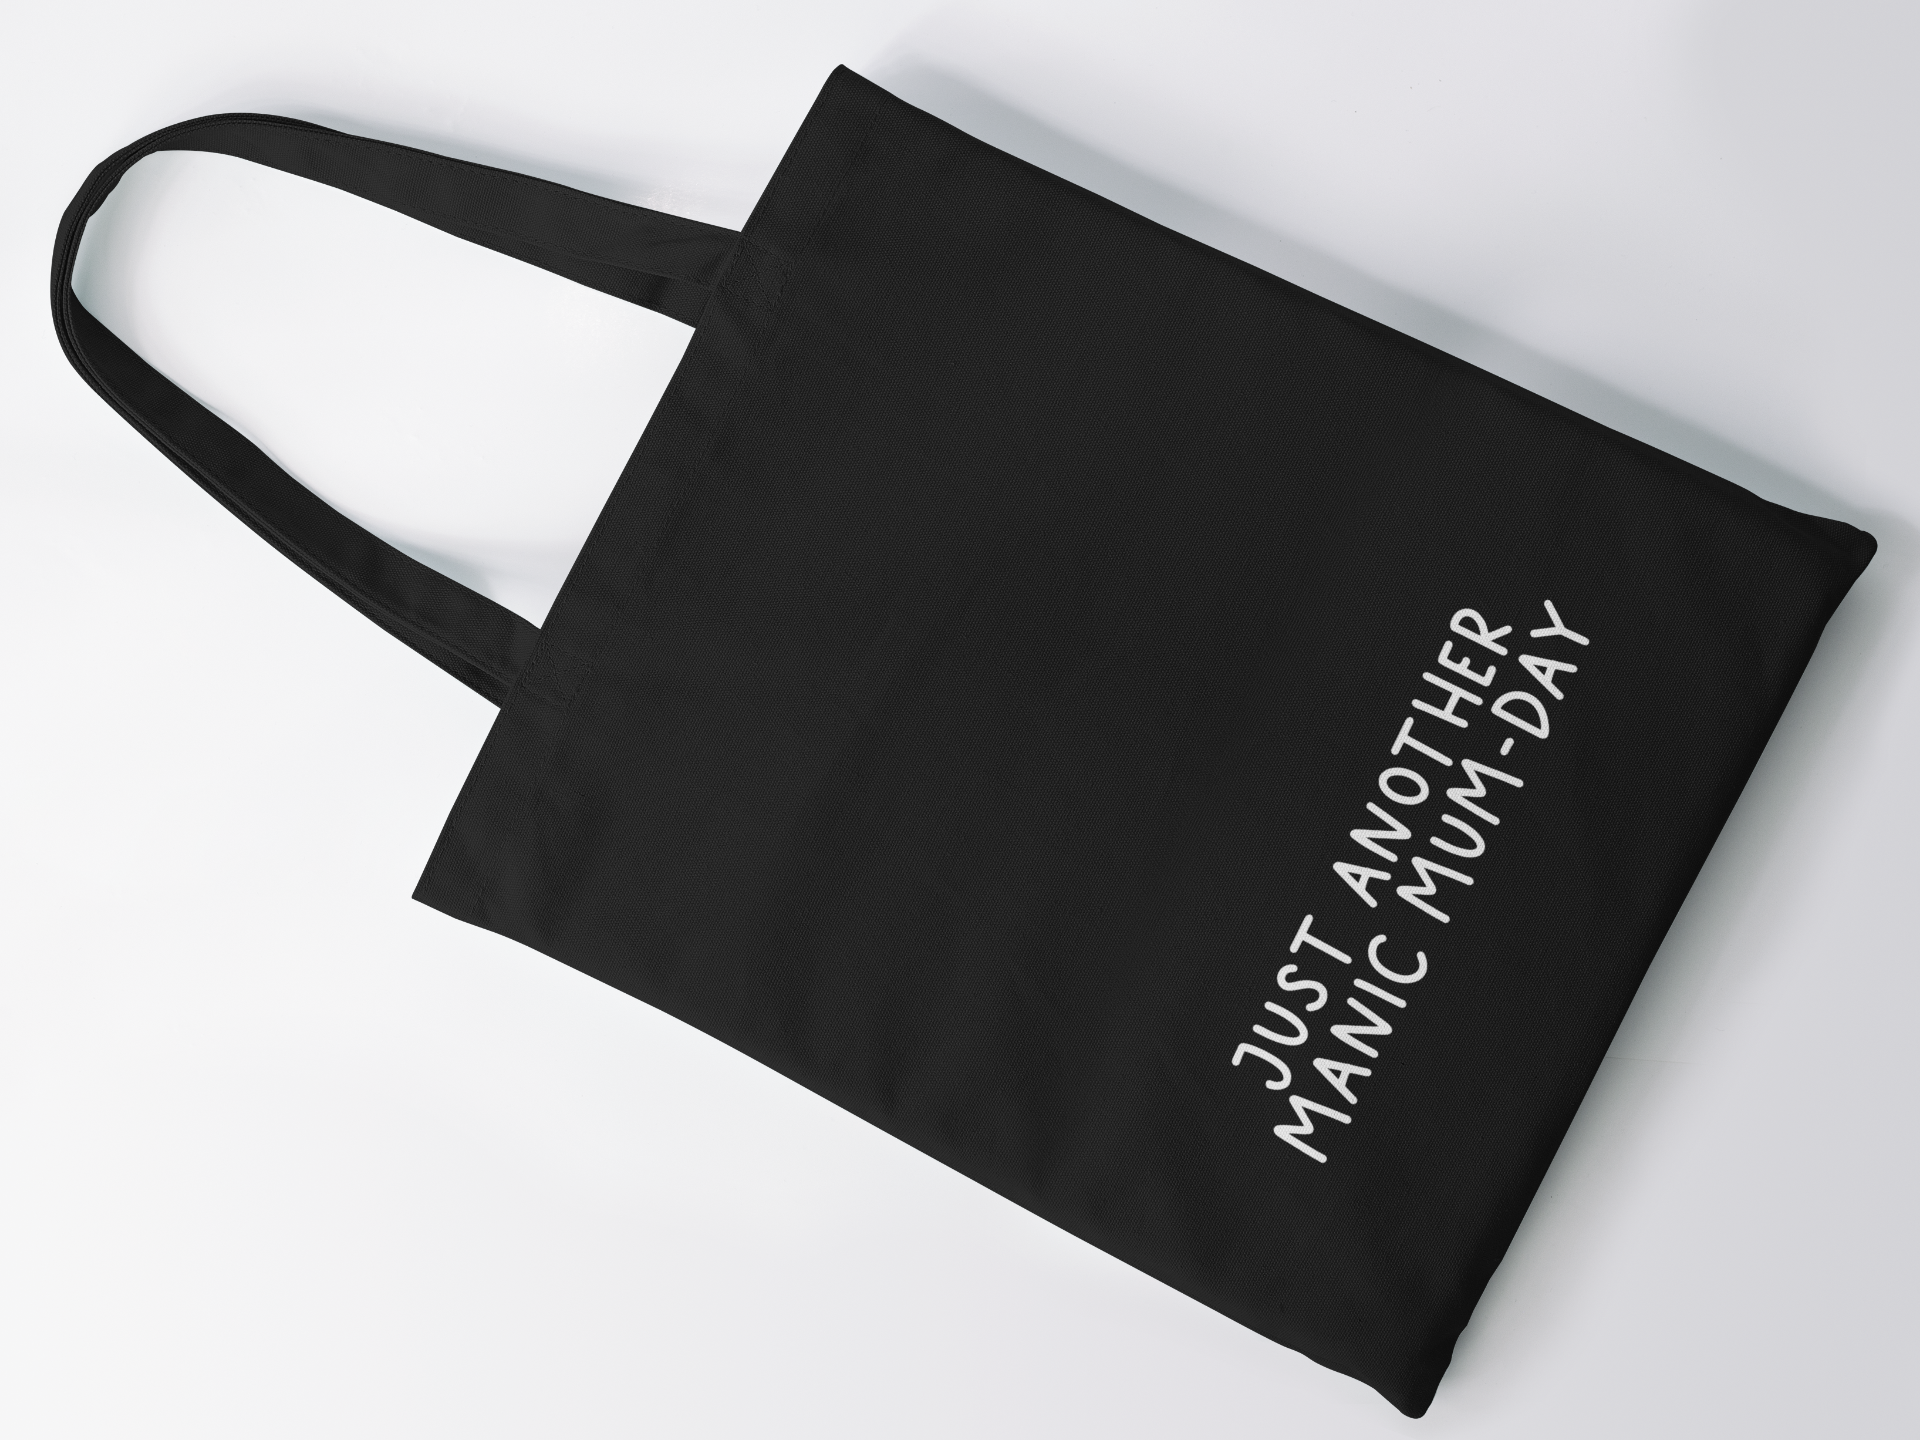 Black cotton tote bag with a quote to the bottom whoch reads 'just another manic mum-day' in white lettering.